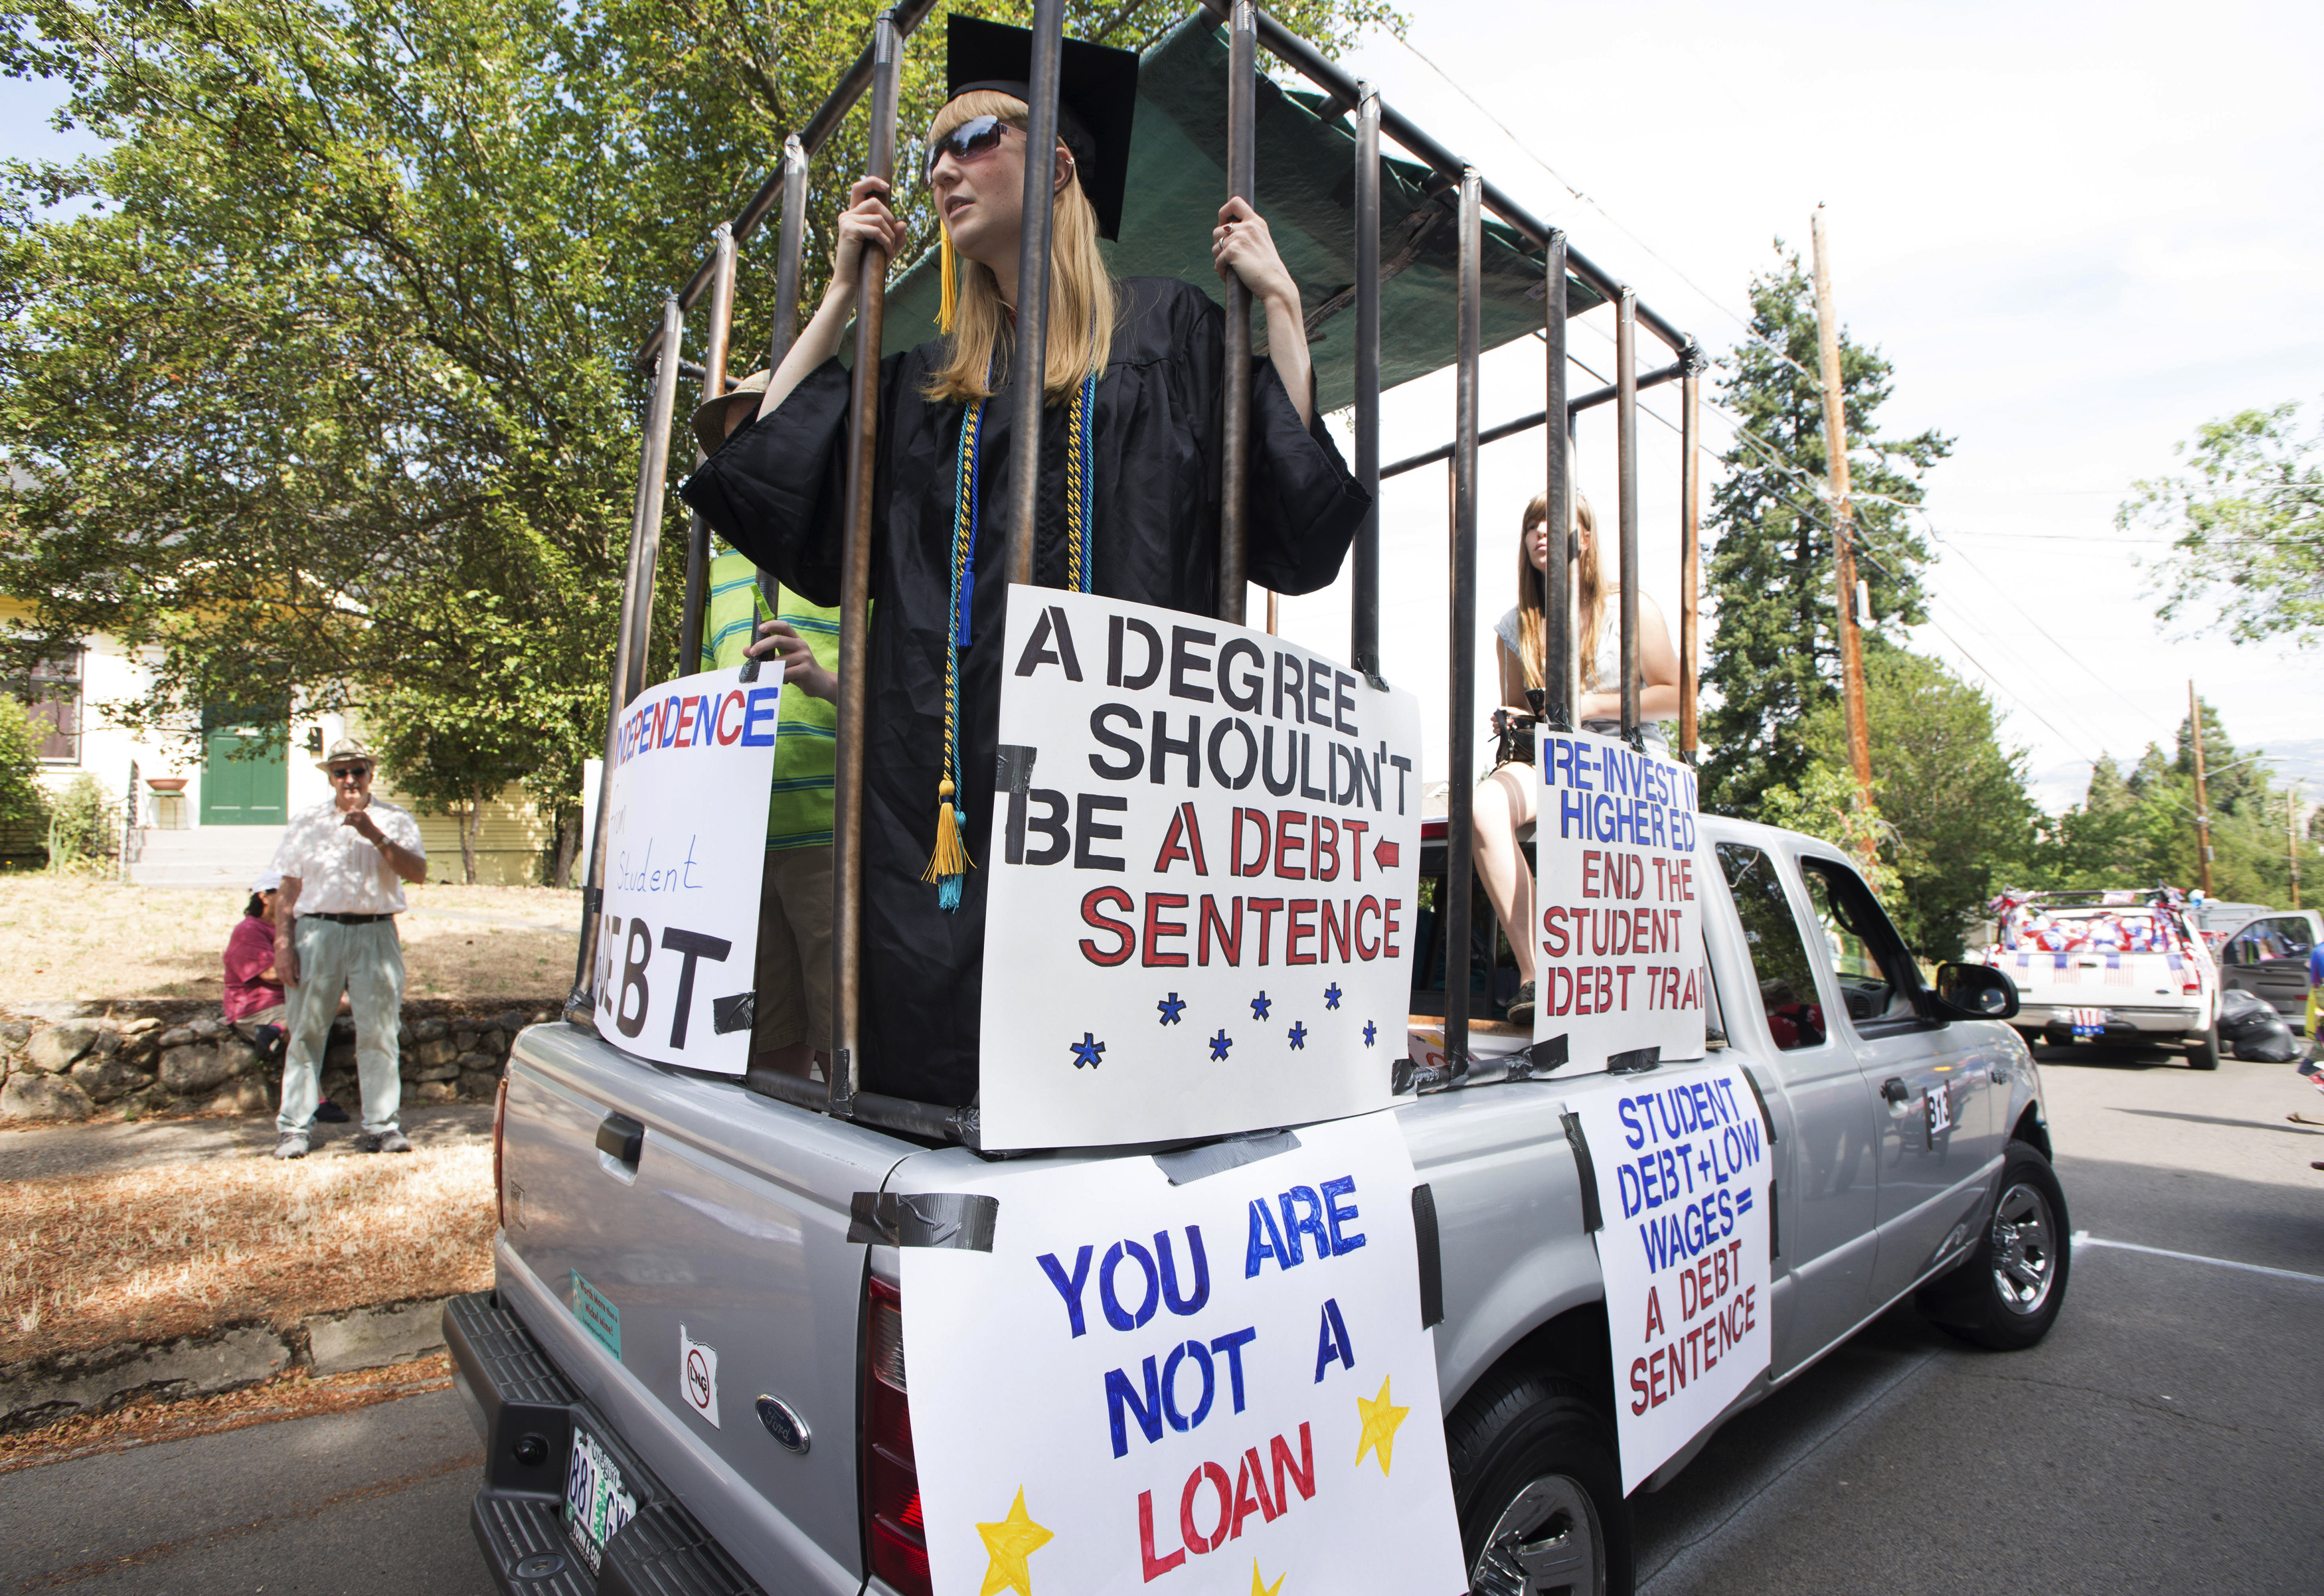 Parade participants protesting against high student loan burdens are preparing to take part in the annual July 4th parade at Ashland